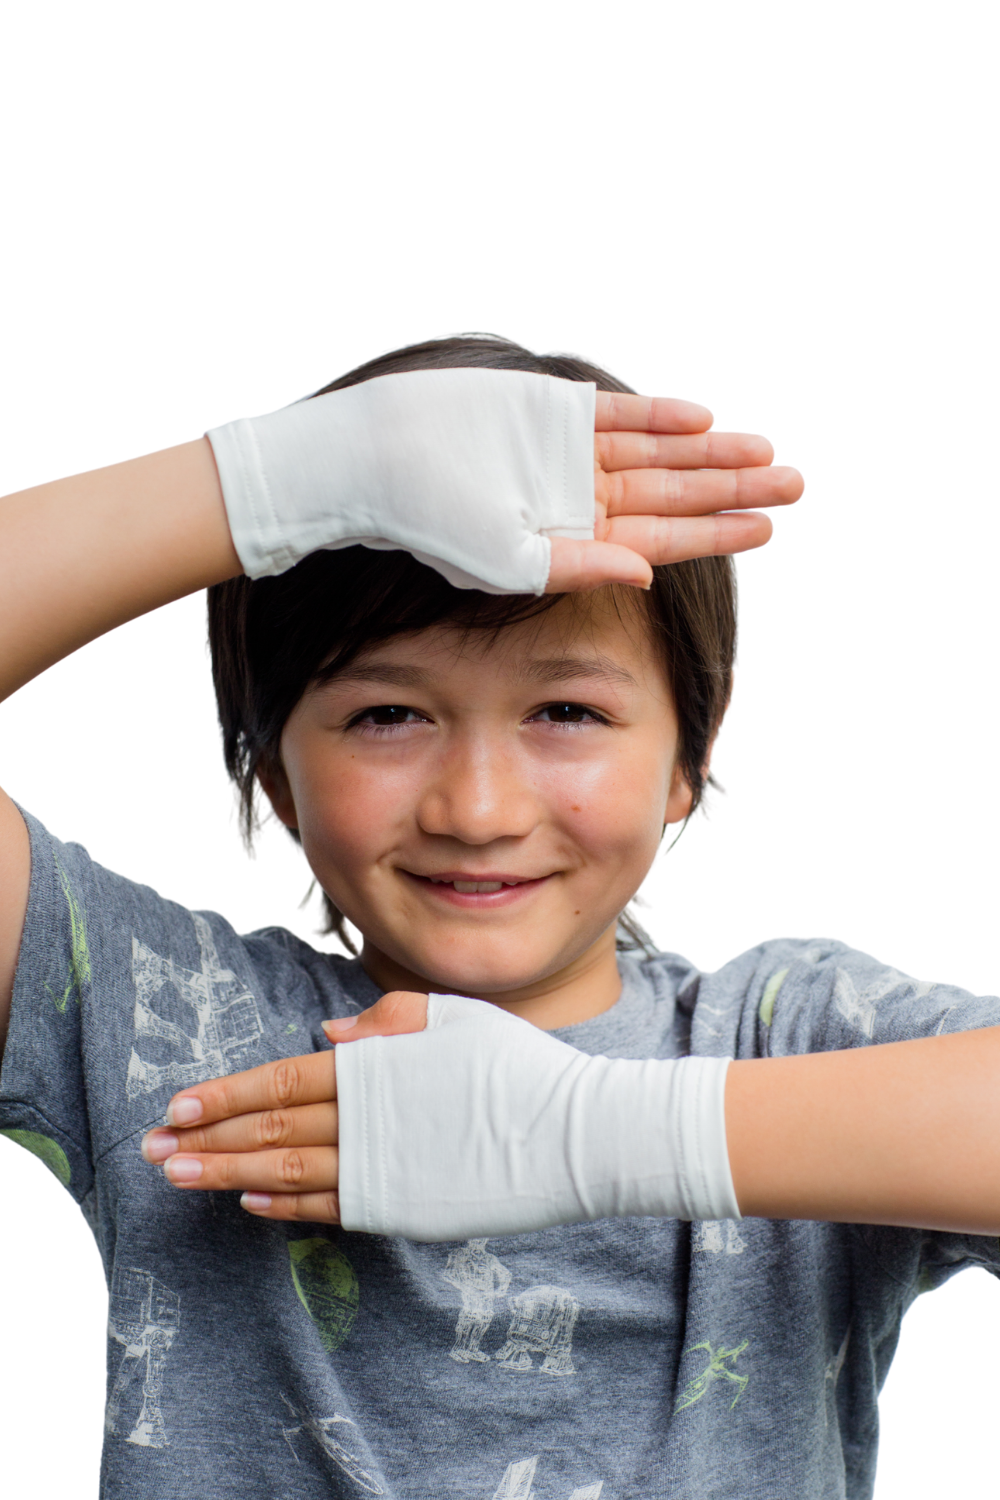 Fingerless Gloves for kids - kid showing gloves and protecting face